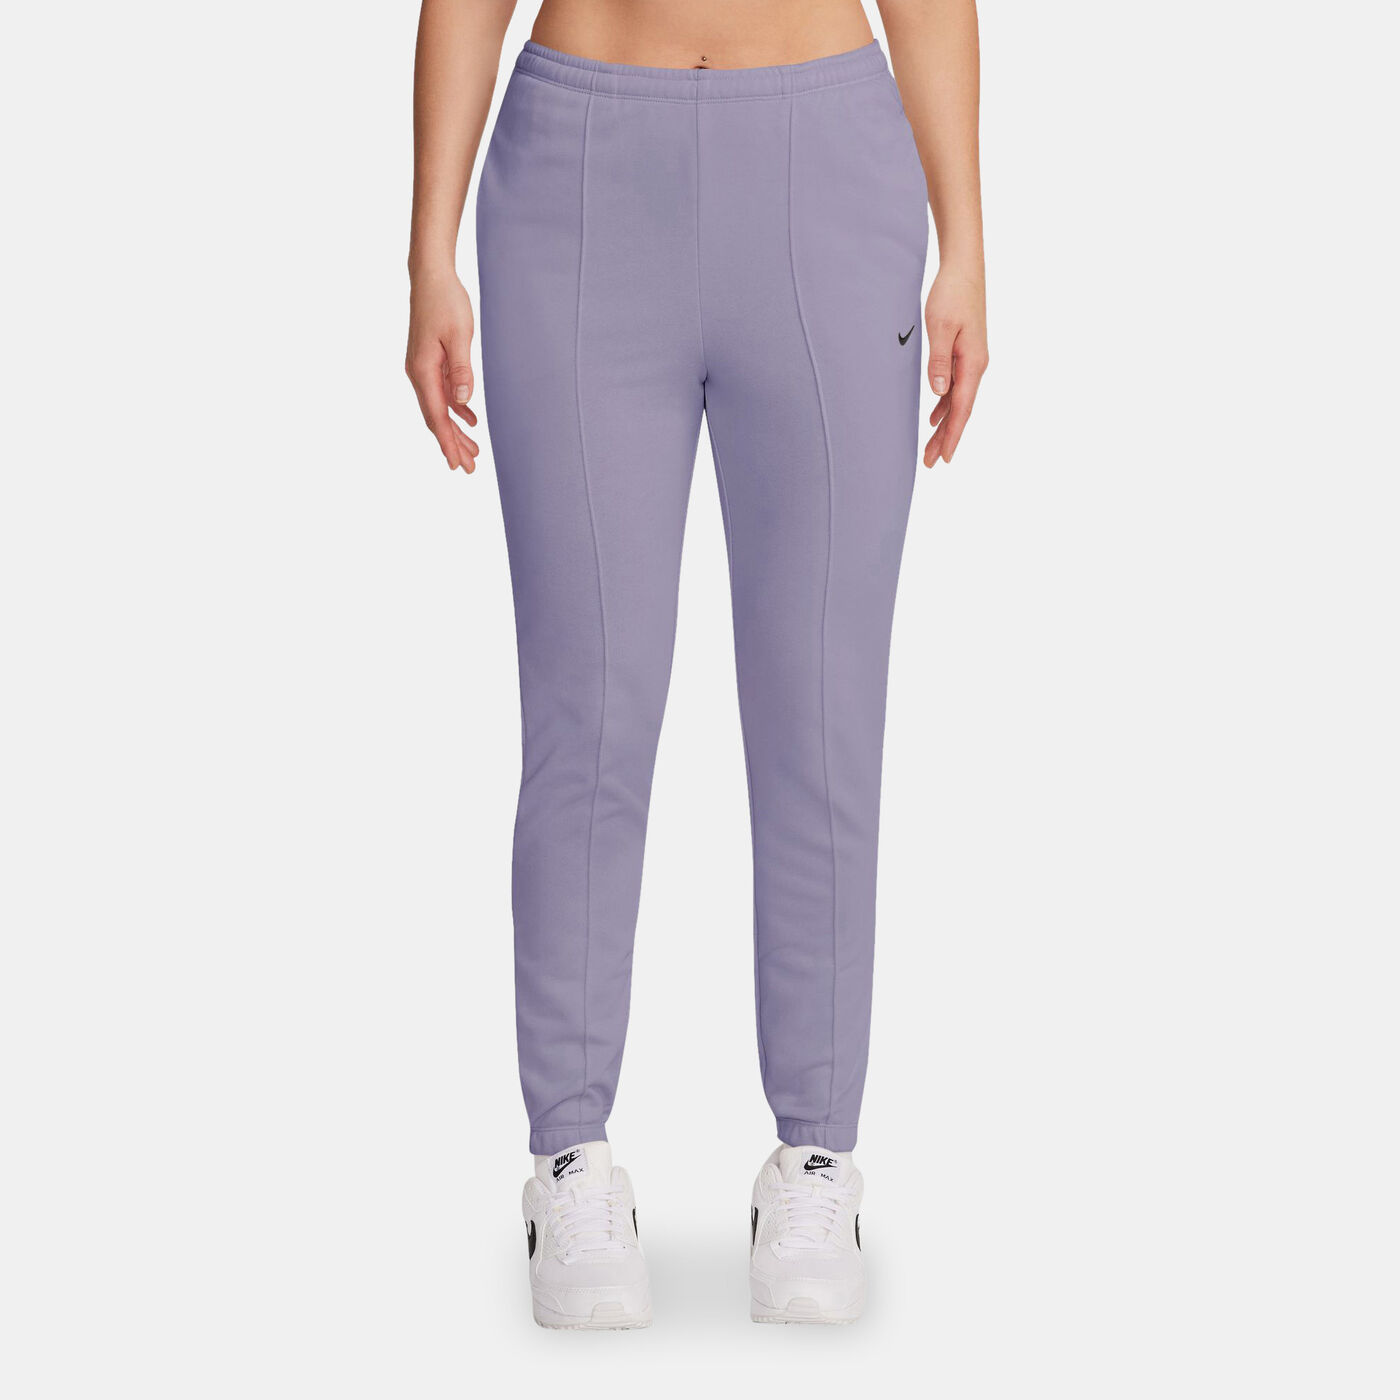 Women's High-Waisted French Terry Sweatpants